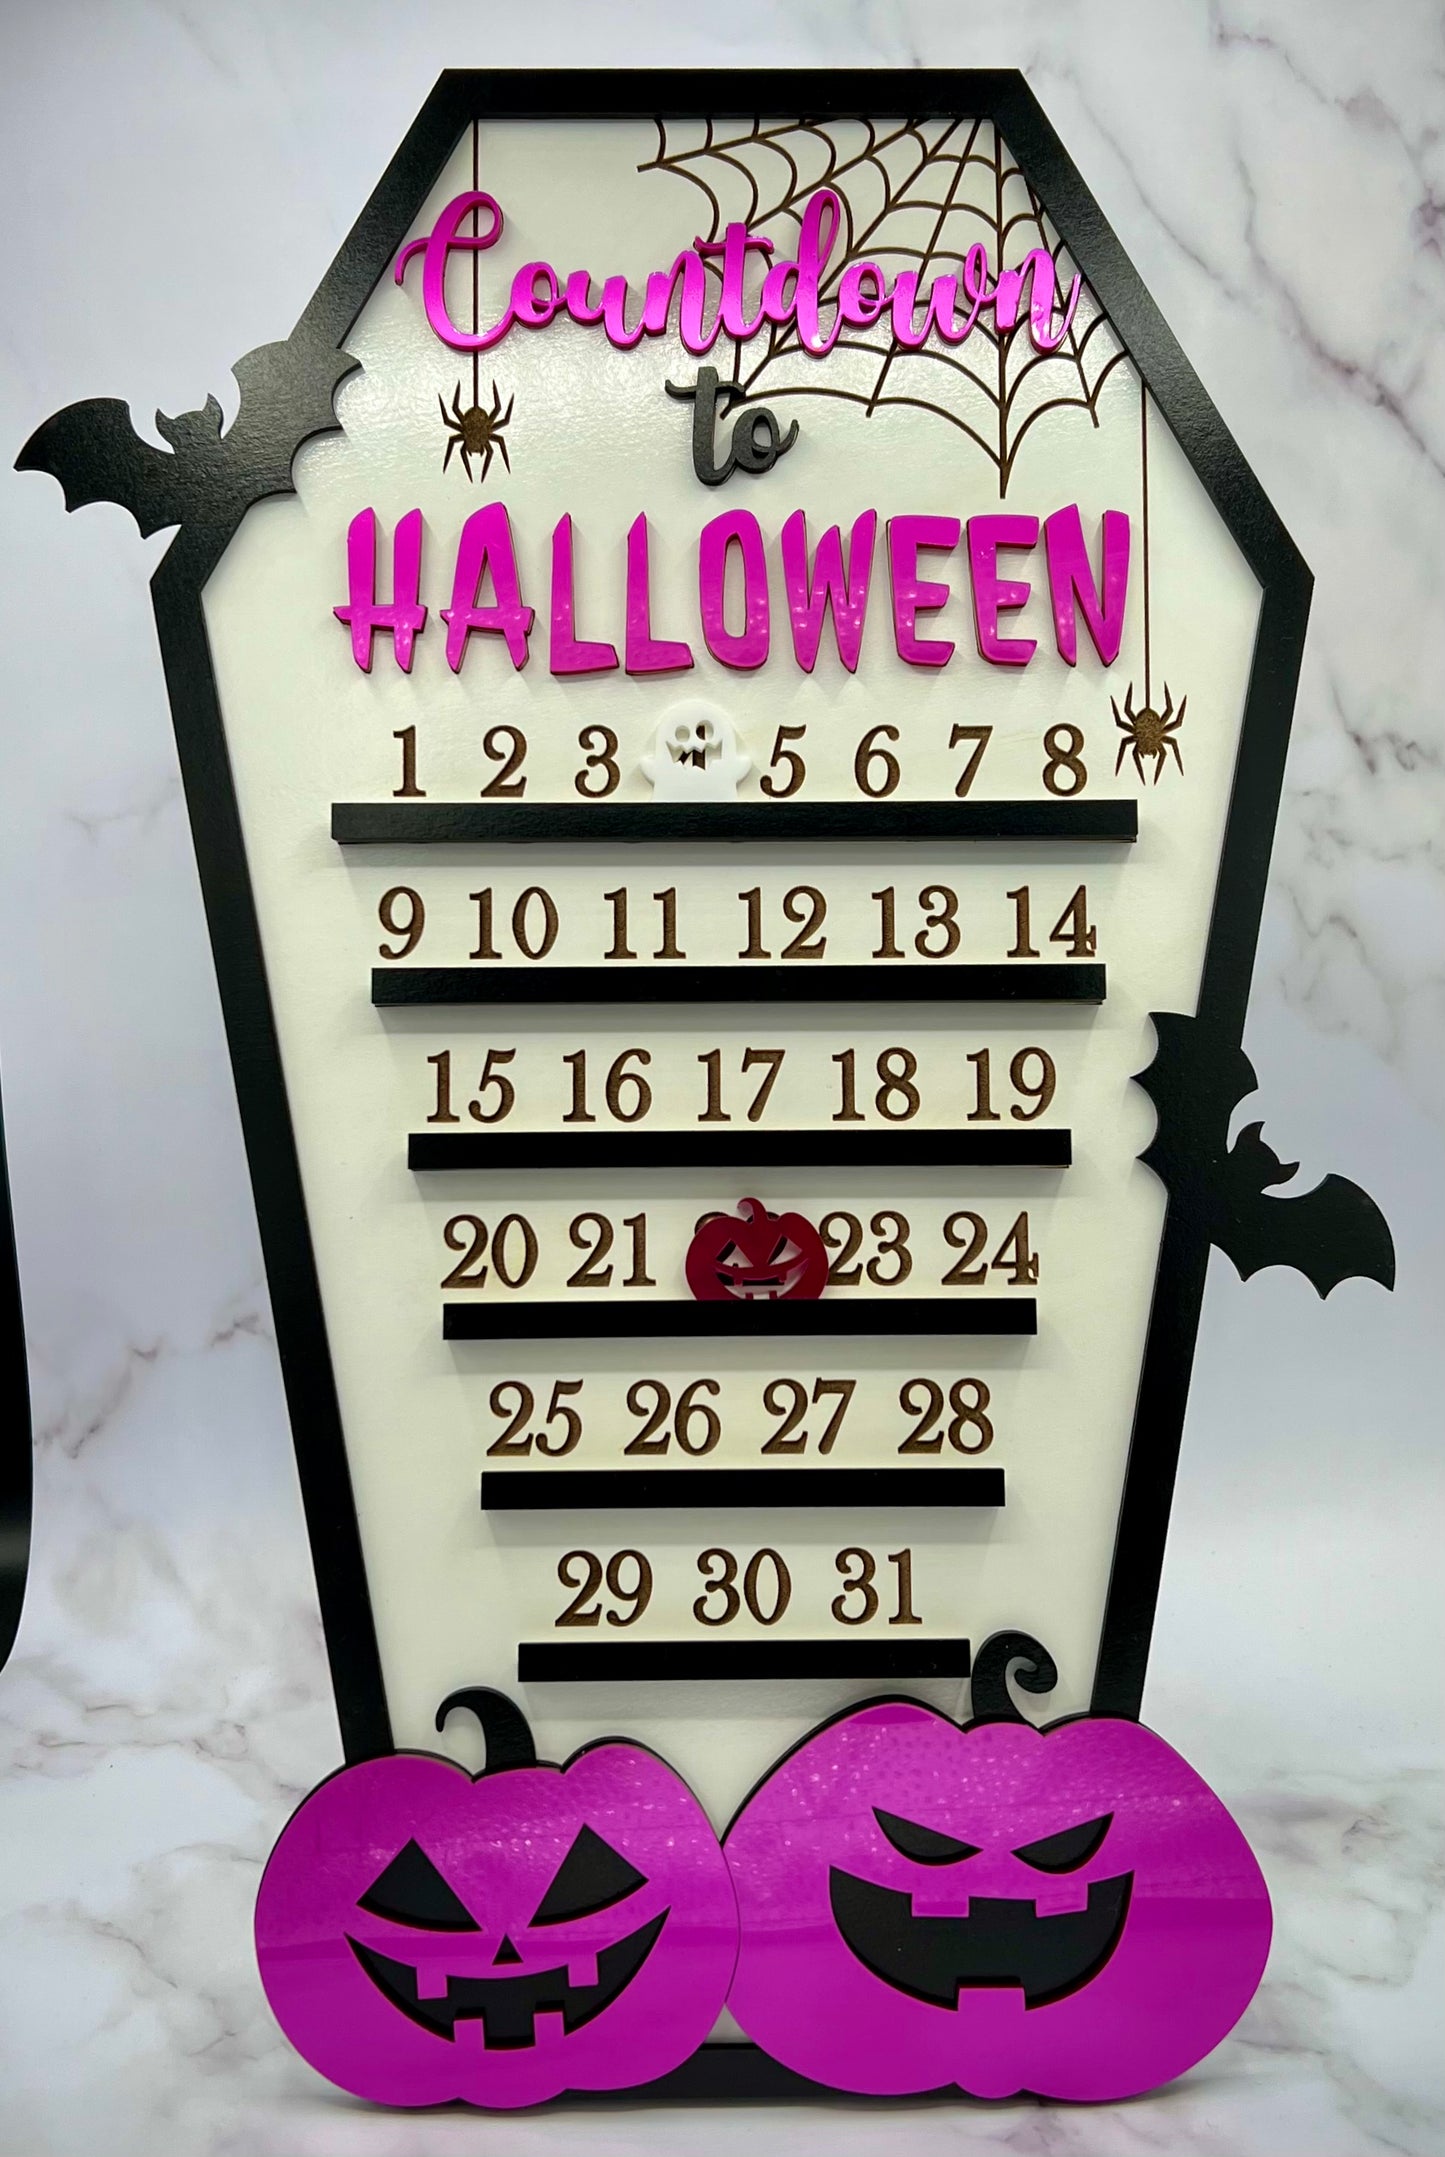 Countdown to Halloween Coffin Calendar with Moveable Ghost, Halloween Decoration